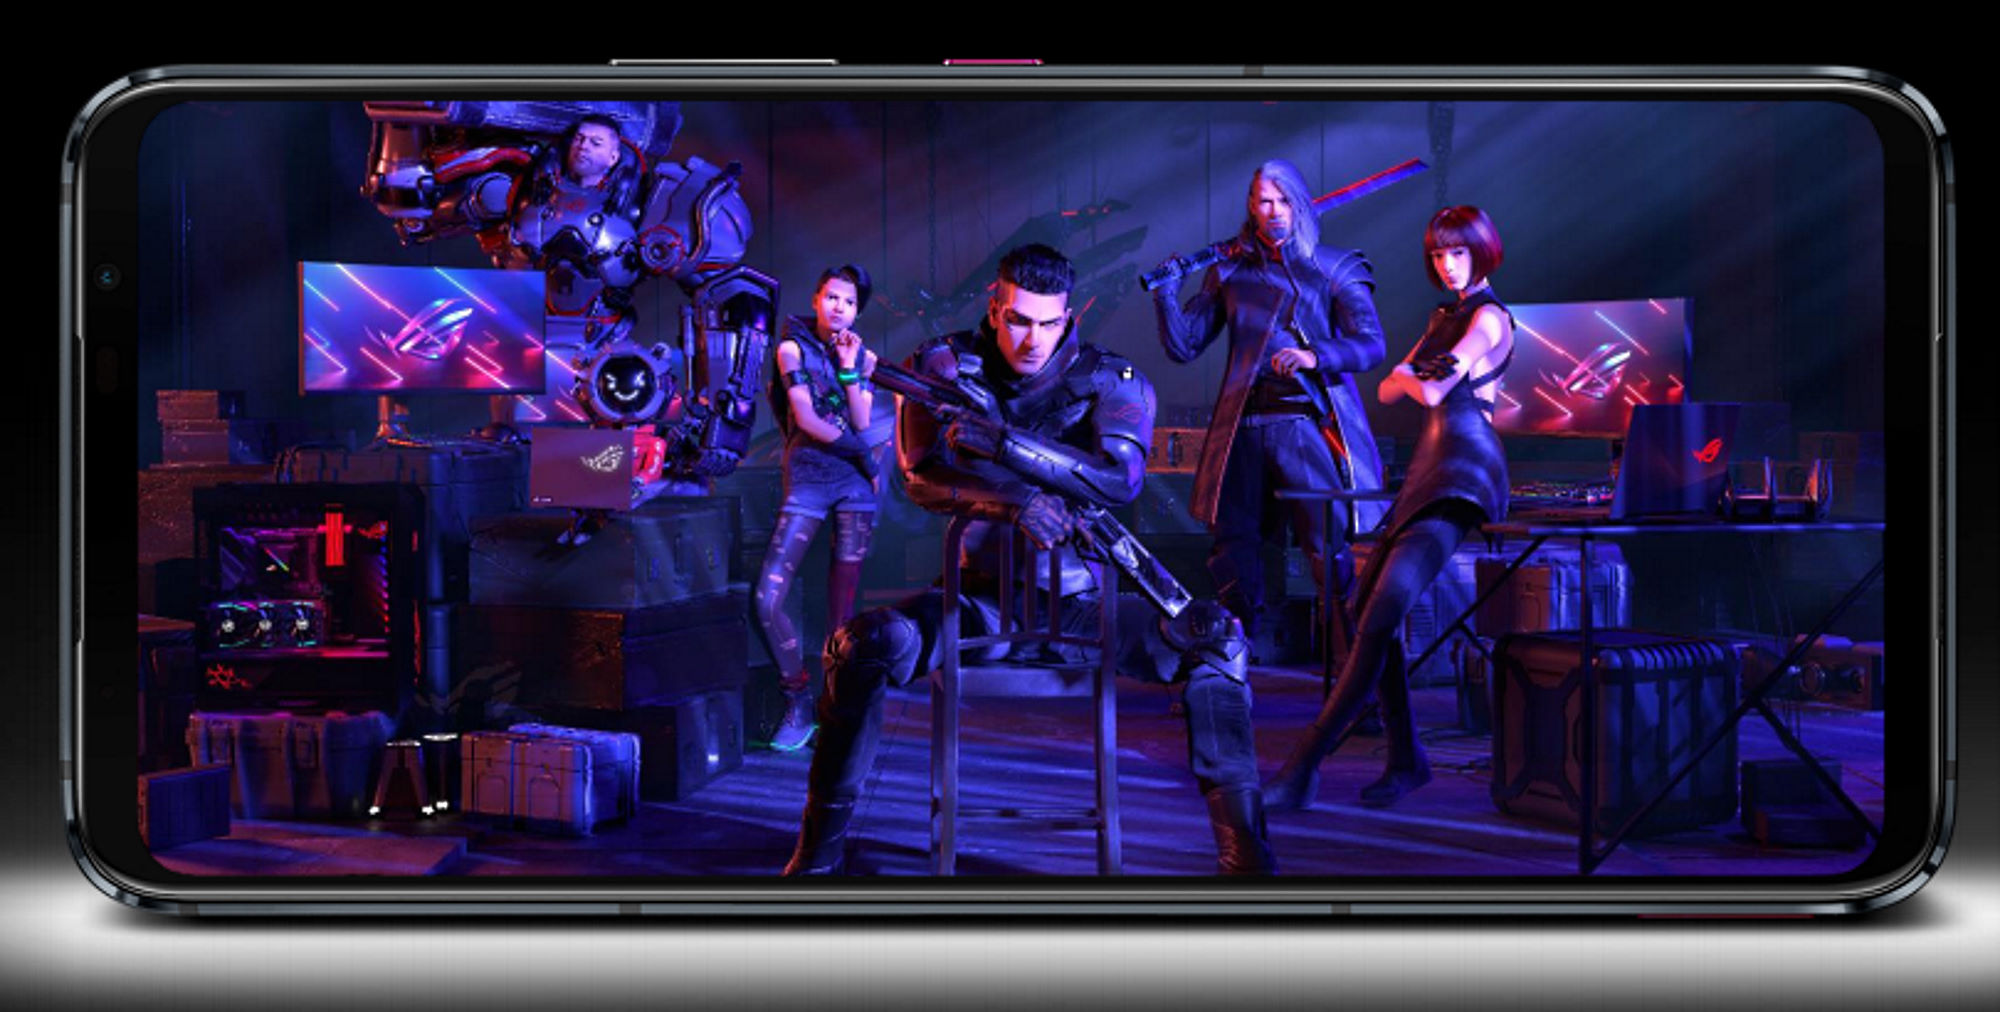 Screen of the ROG Phone 5, with the ROG SAGA characters featured.